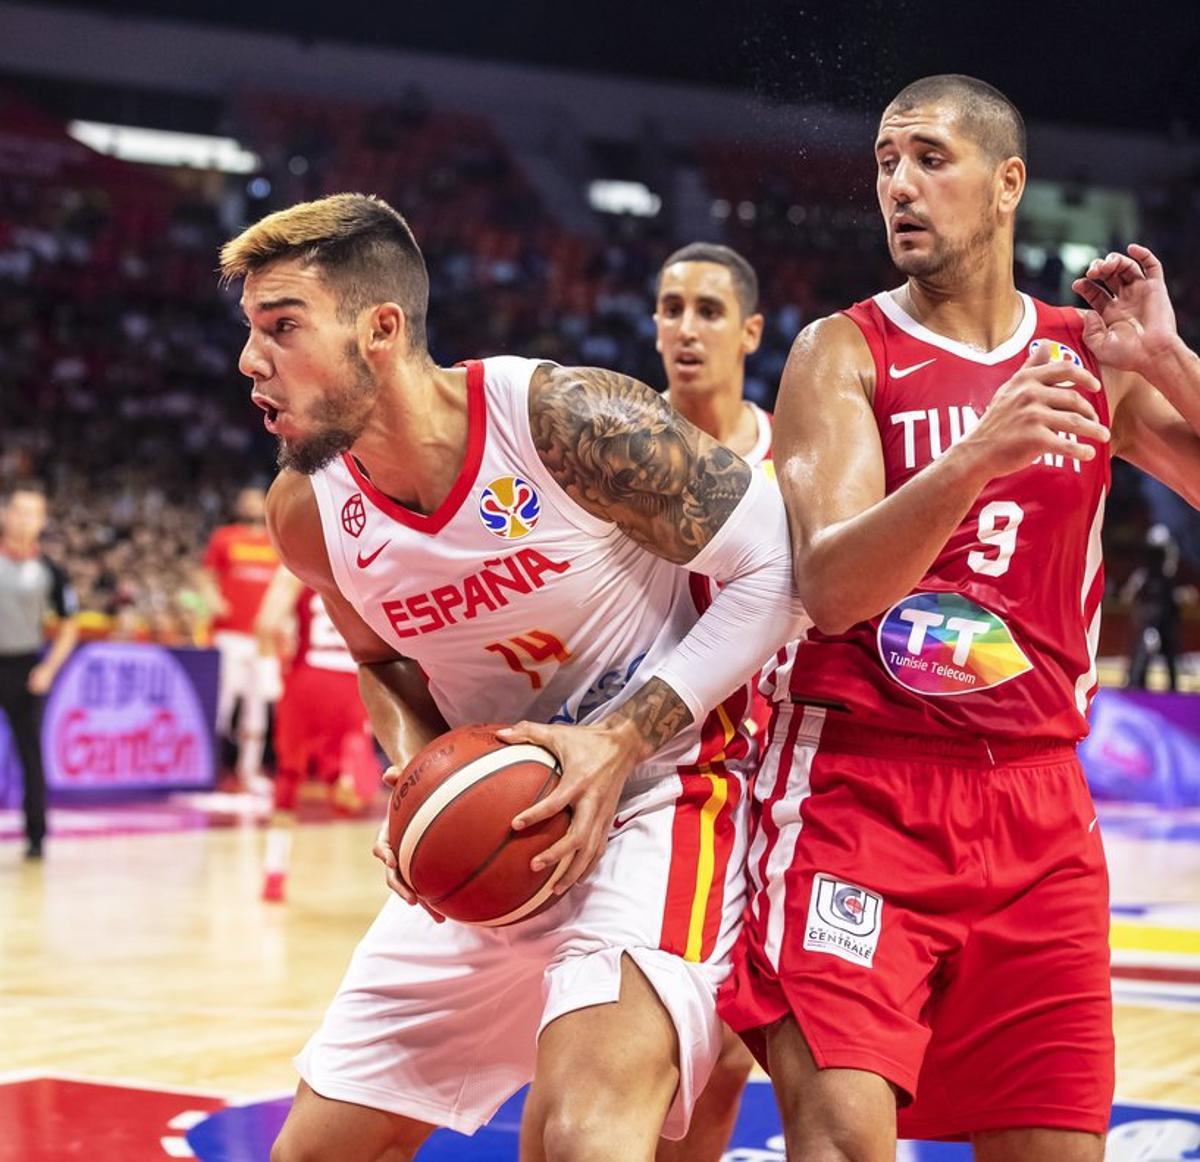 Guangzhou (China), 31/08/2019.- Willy Hernangomez Geuer (L) of Spain in action against Mohamed Hadidane (R) of Tunisia during the FIBA Basketball World Cup 2019 group C match between Spain and Tunisia in Guangzhou, China, 31 August 2019. (Baloncesto, España, Túnez, Túnez) EFE/EPA/ALEX PLAVEVSKI